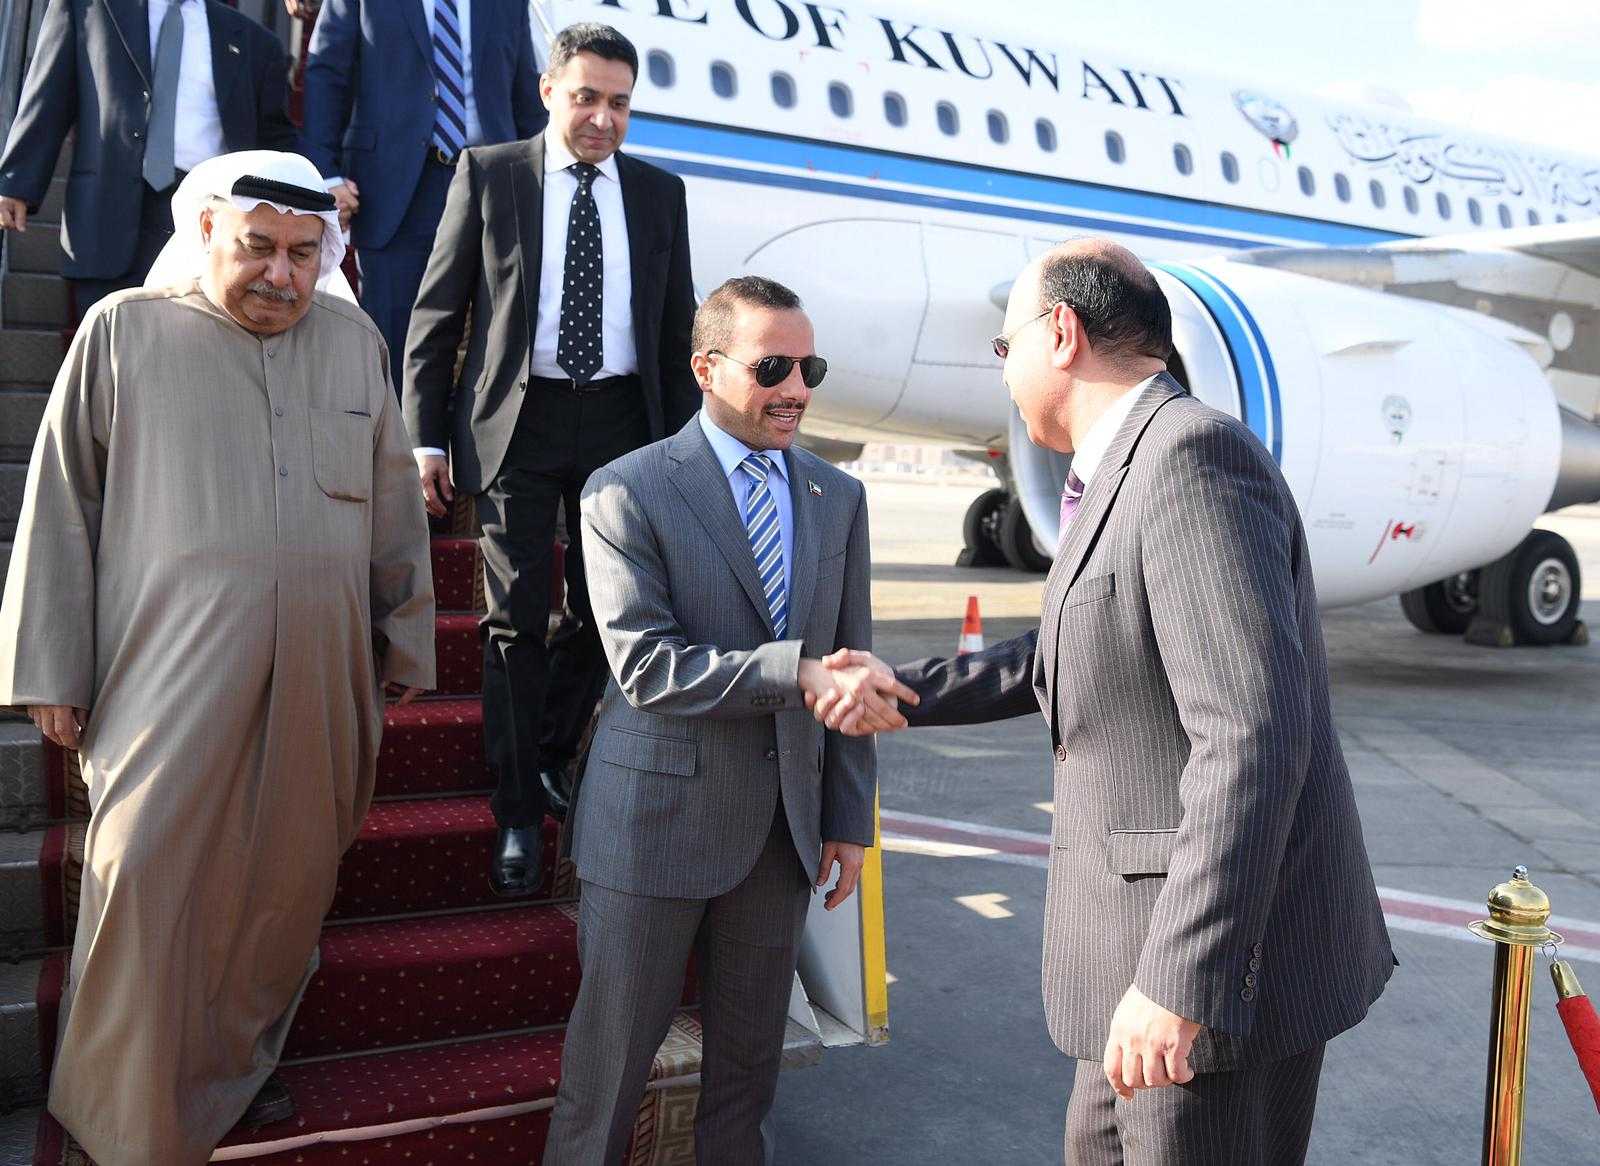 Speaker of the Kuwaiti National Assembly (Parliament) Marzouq Al-Ghanim arrives in Cairo for Arab parliamentary meet